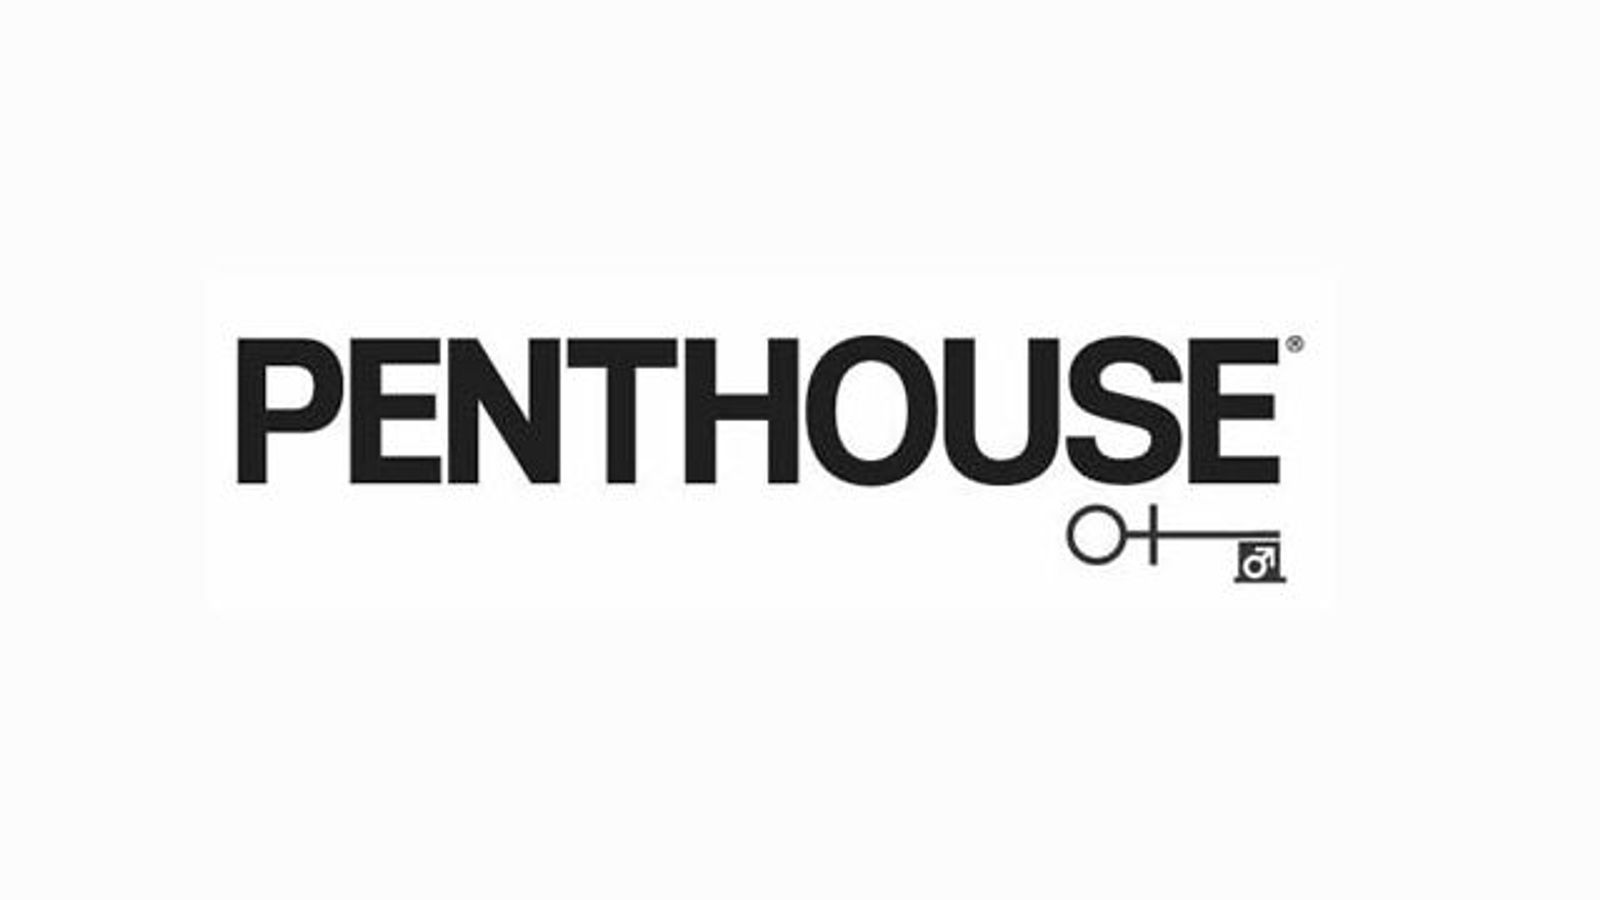 The Penthouse Club Opens in Perth